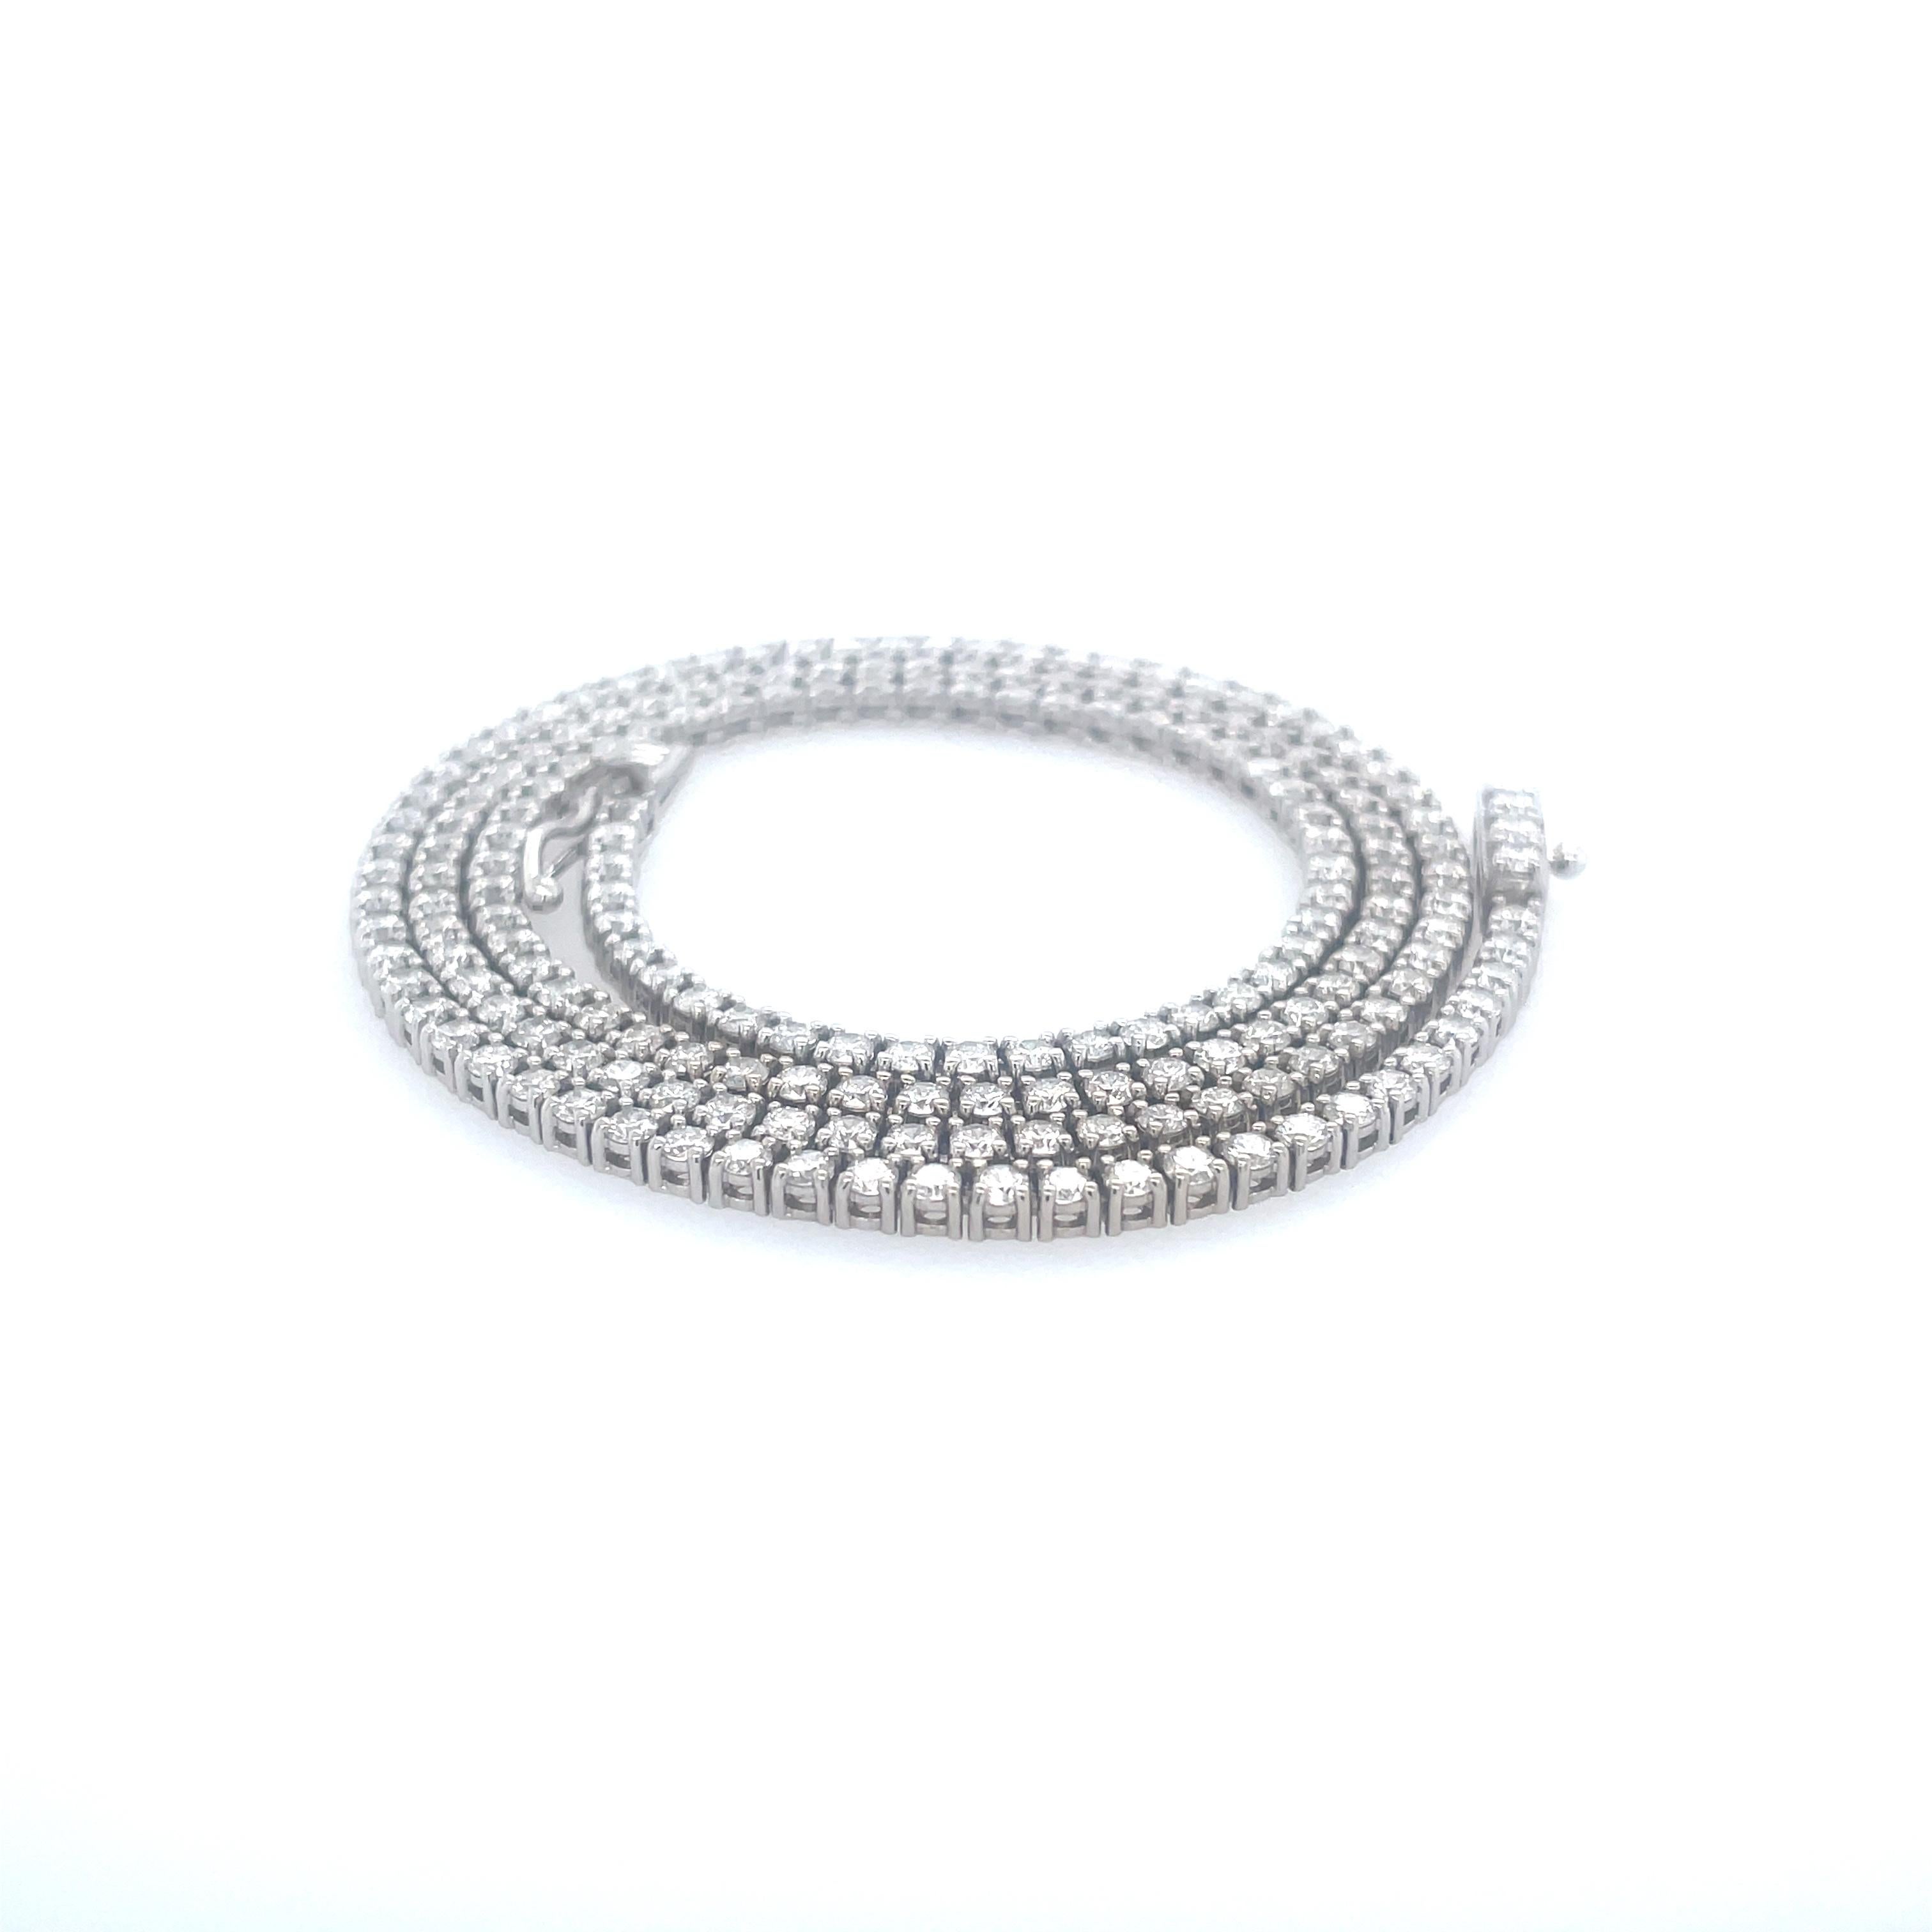 4.75 Carat Diamond Tennis Necklace with Round Diamonds in White Gold Chain For Sale 1